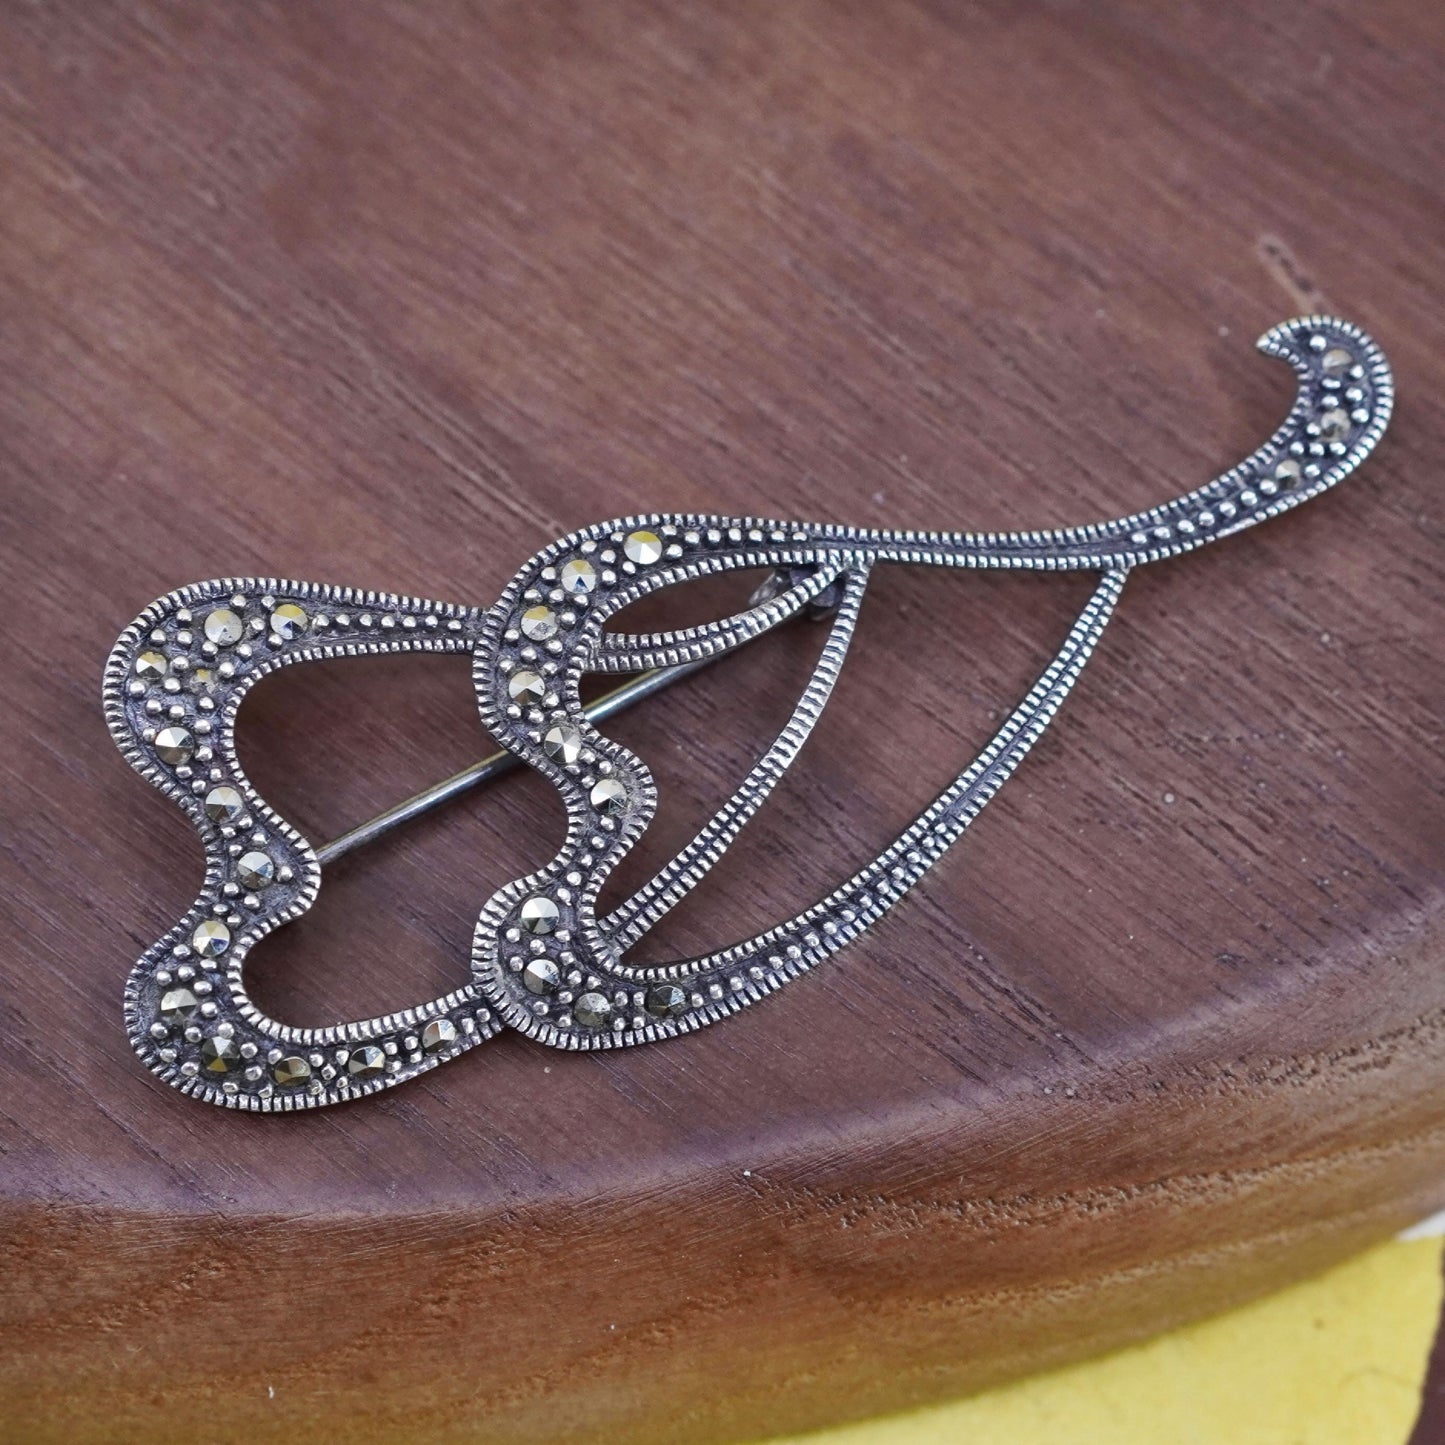 Vintage handmade sterling 925 silver double heart brooch with Marcasite